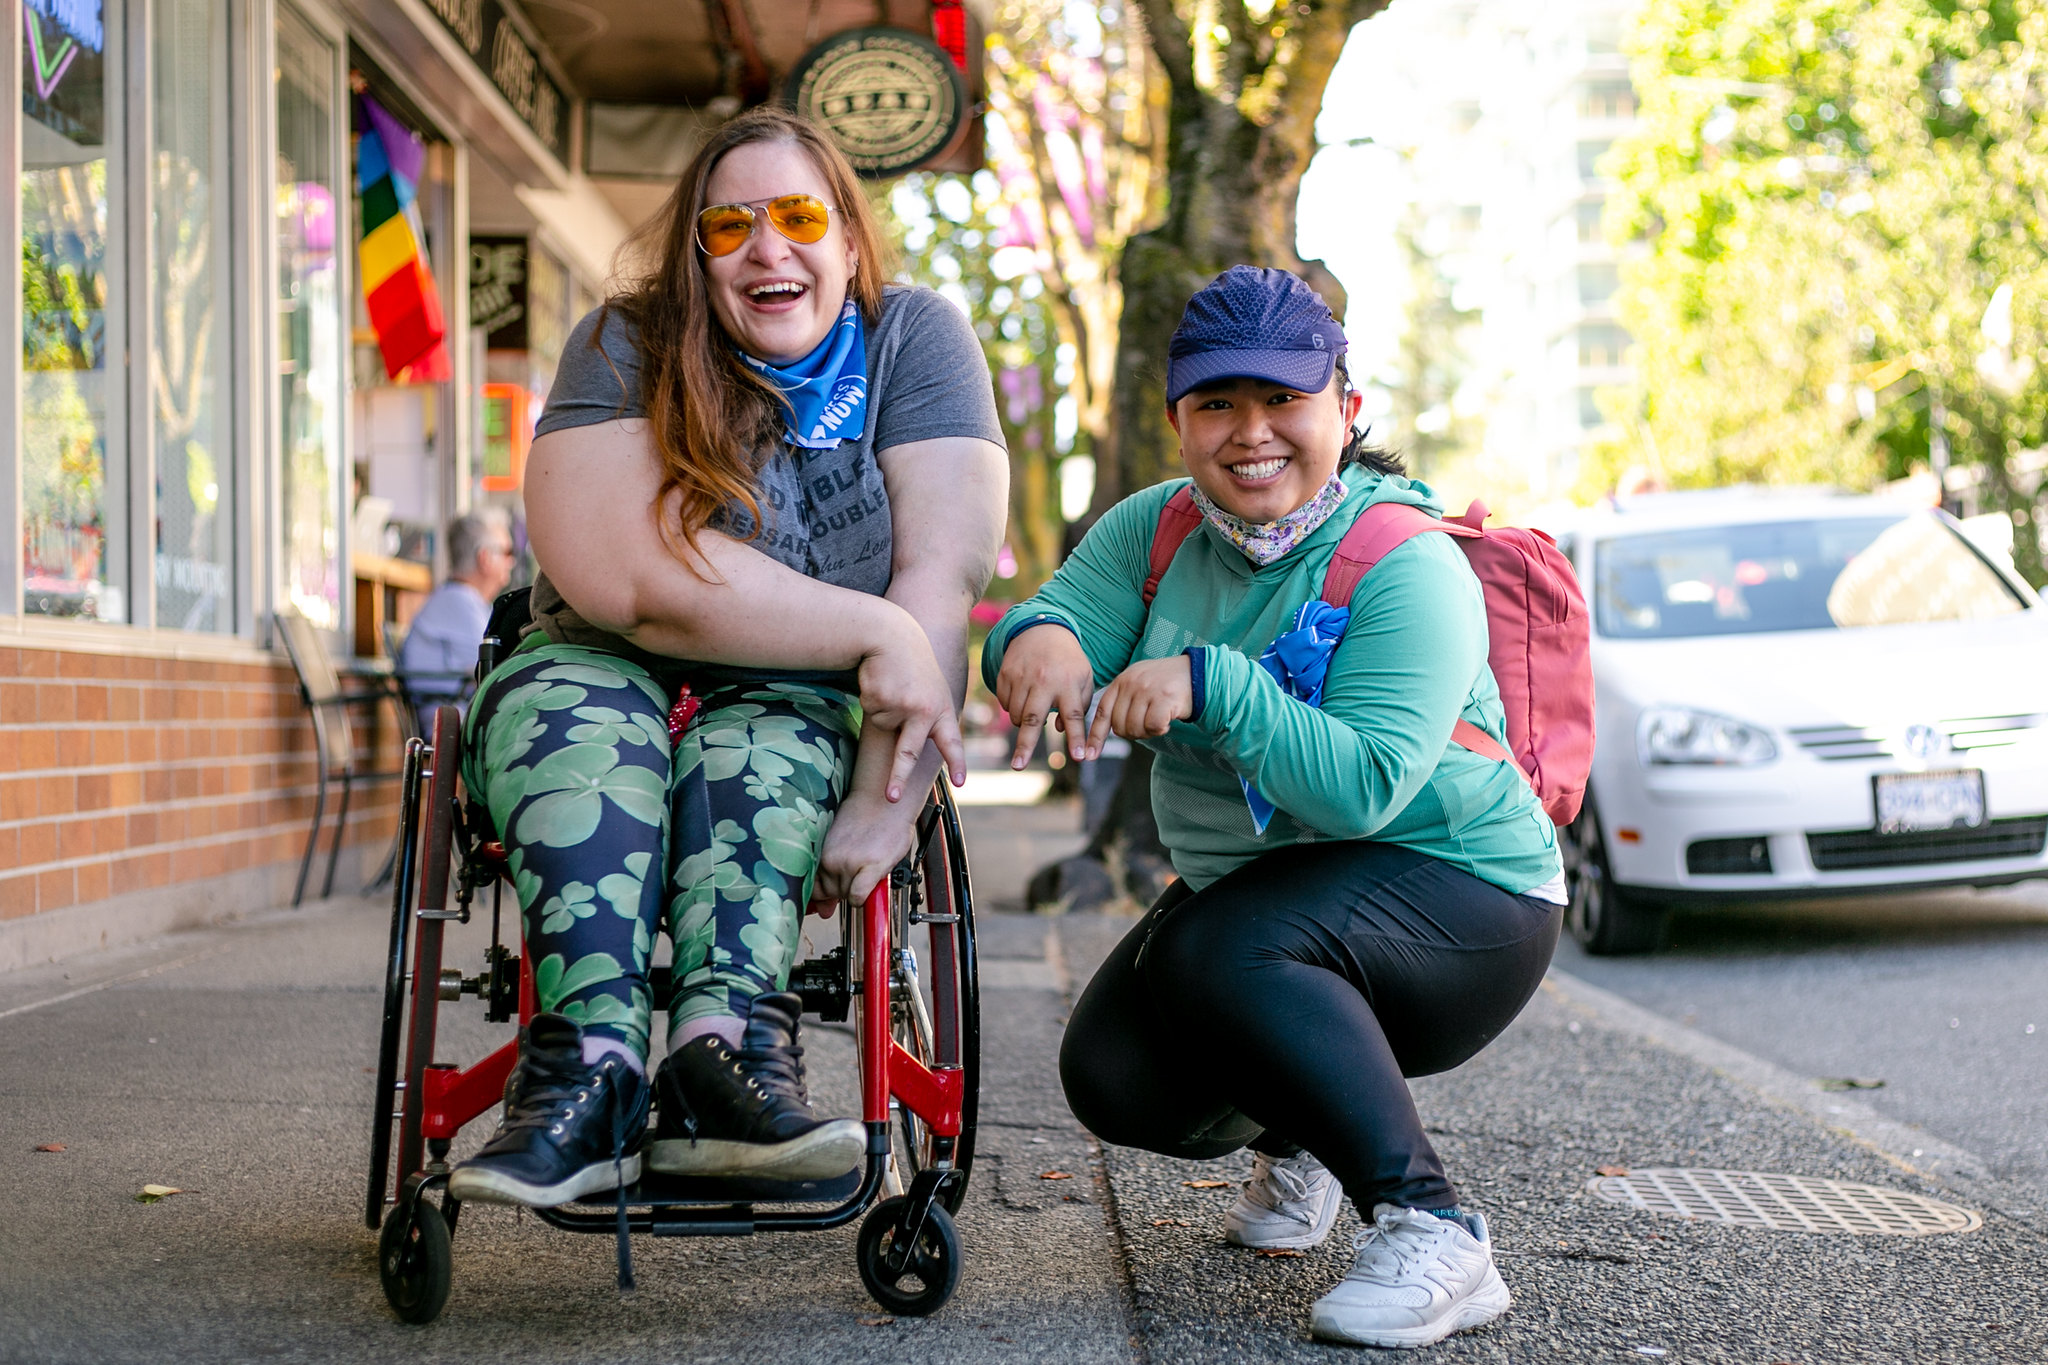 two women, one sitting on a wheelchair, smile as they pose on the sidewalk for the camera